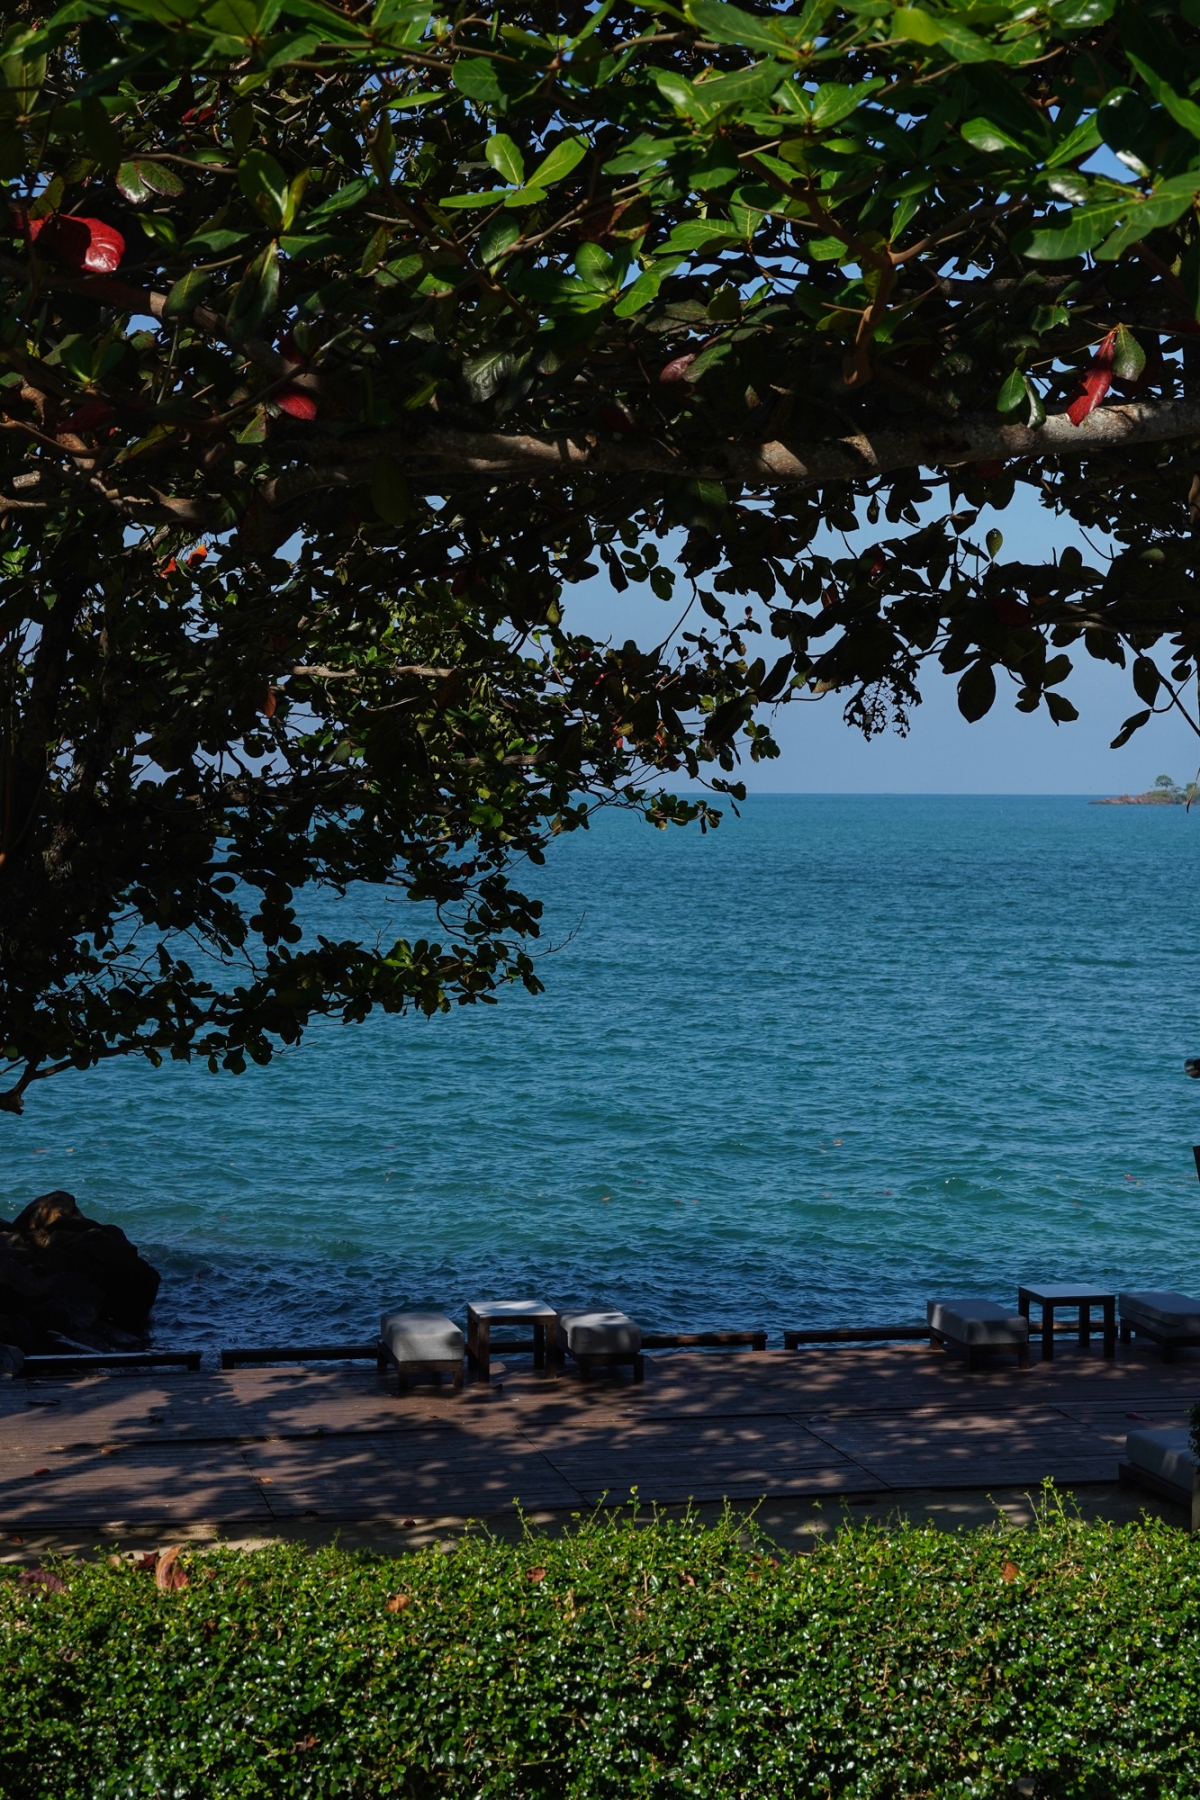 Food & Travel Guide to Koh Chang, Thailand – What to See, Eat & Do